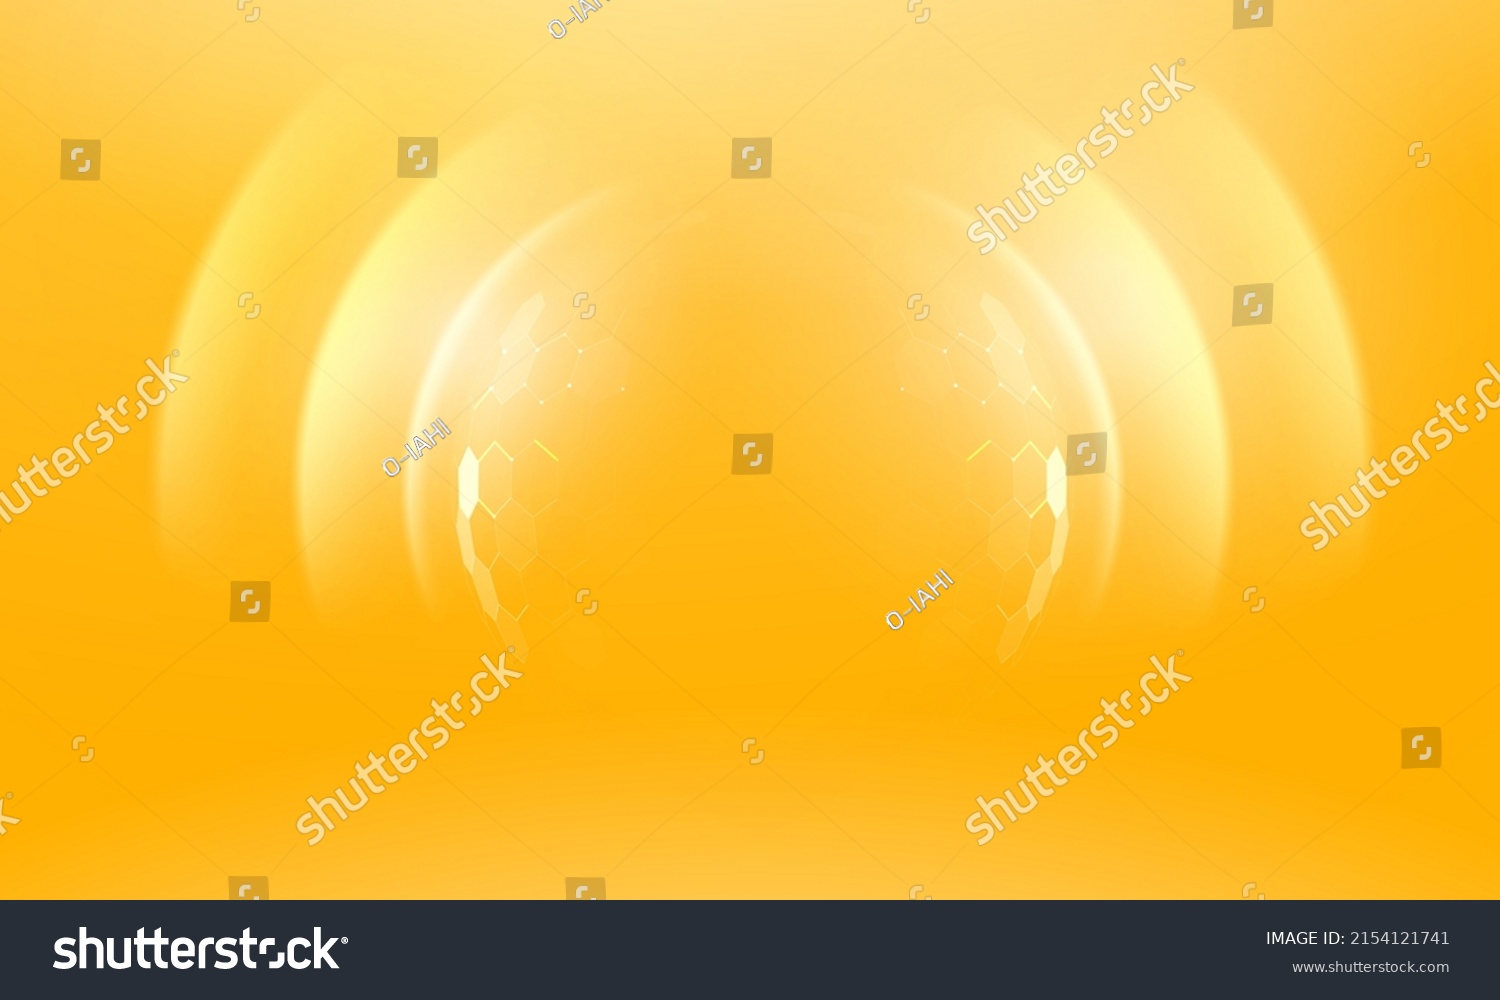 Sun protection from ultraviolet light, in futuristic glowing vector illustration on light background. Сircular barrier to block UV radiation. Template for beauty product, bubble shield effect #2154121741